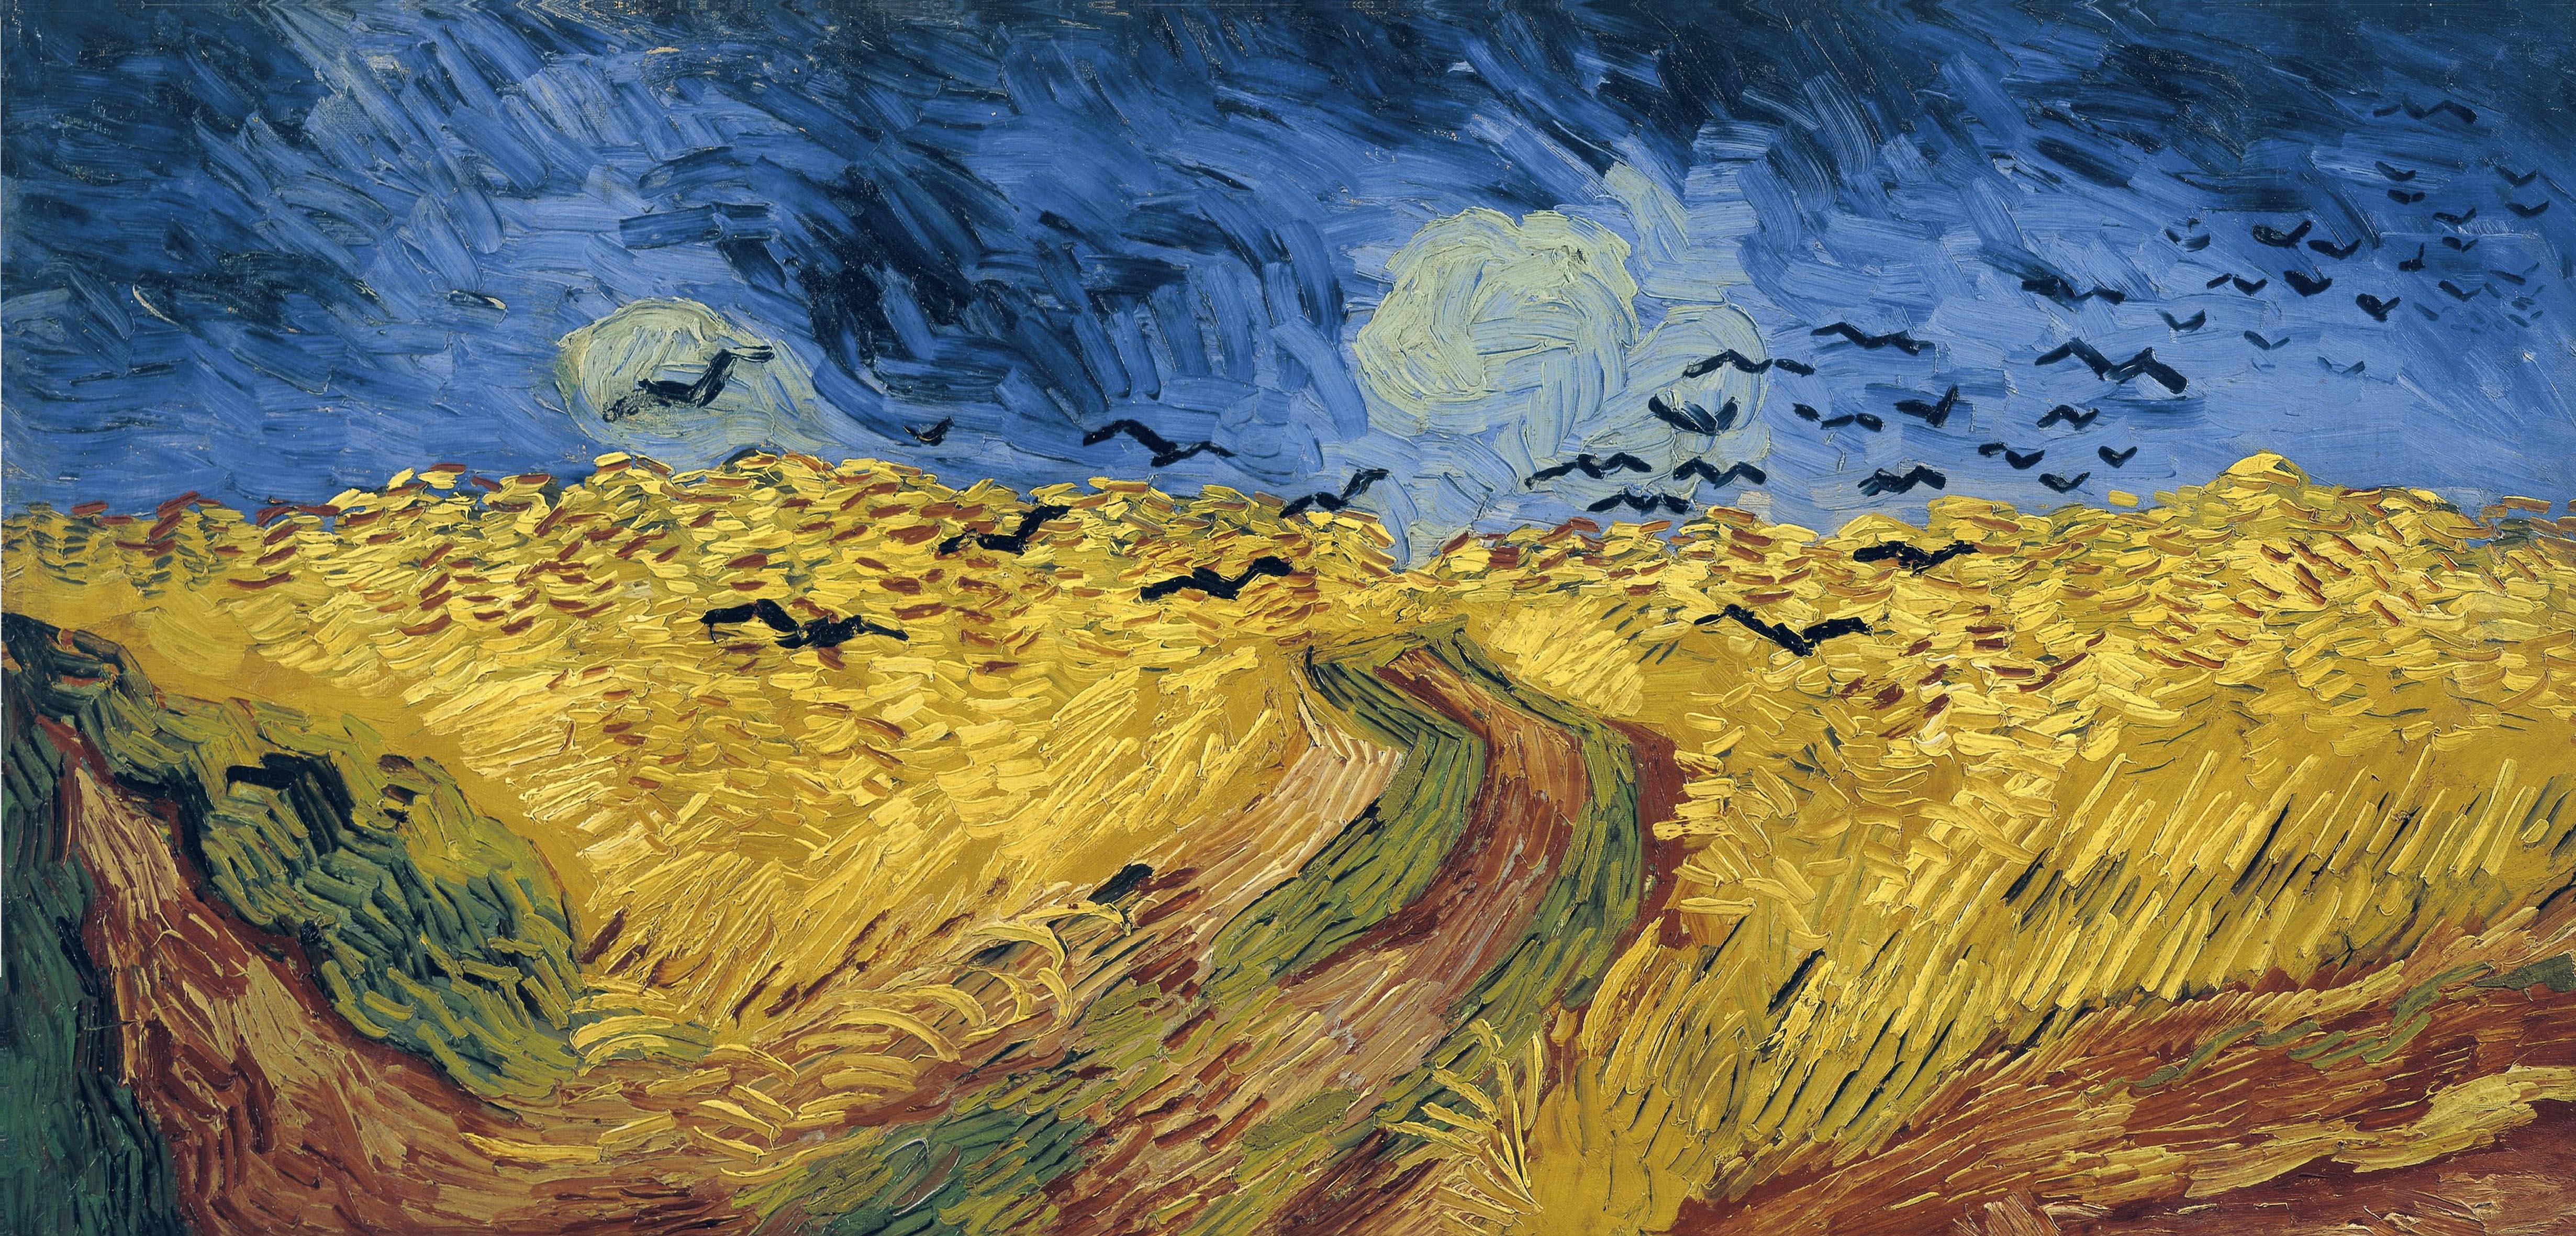 Painting showing a wheat field with crows flying above